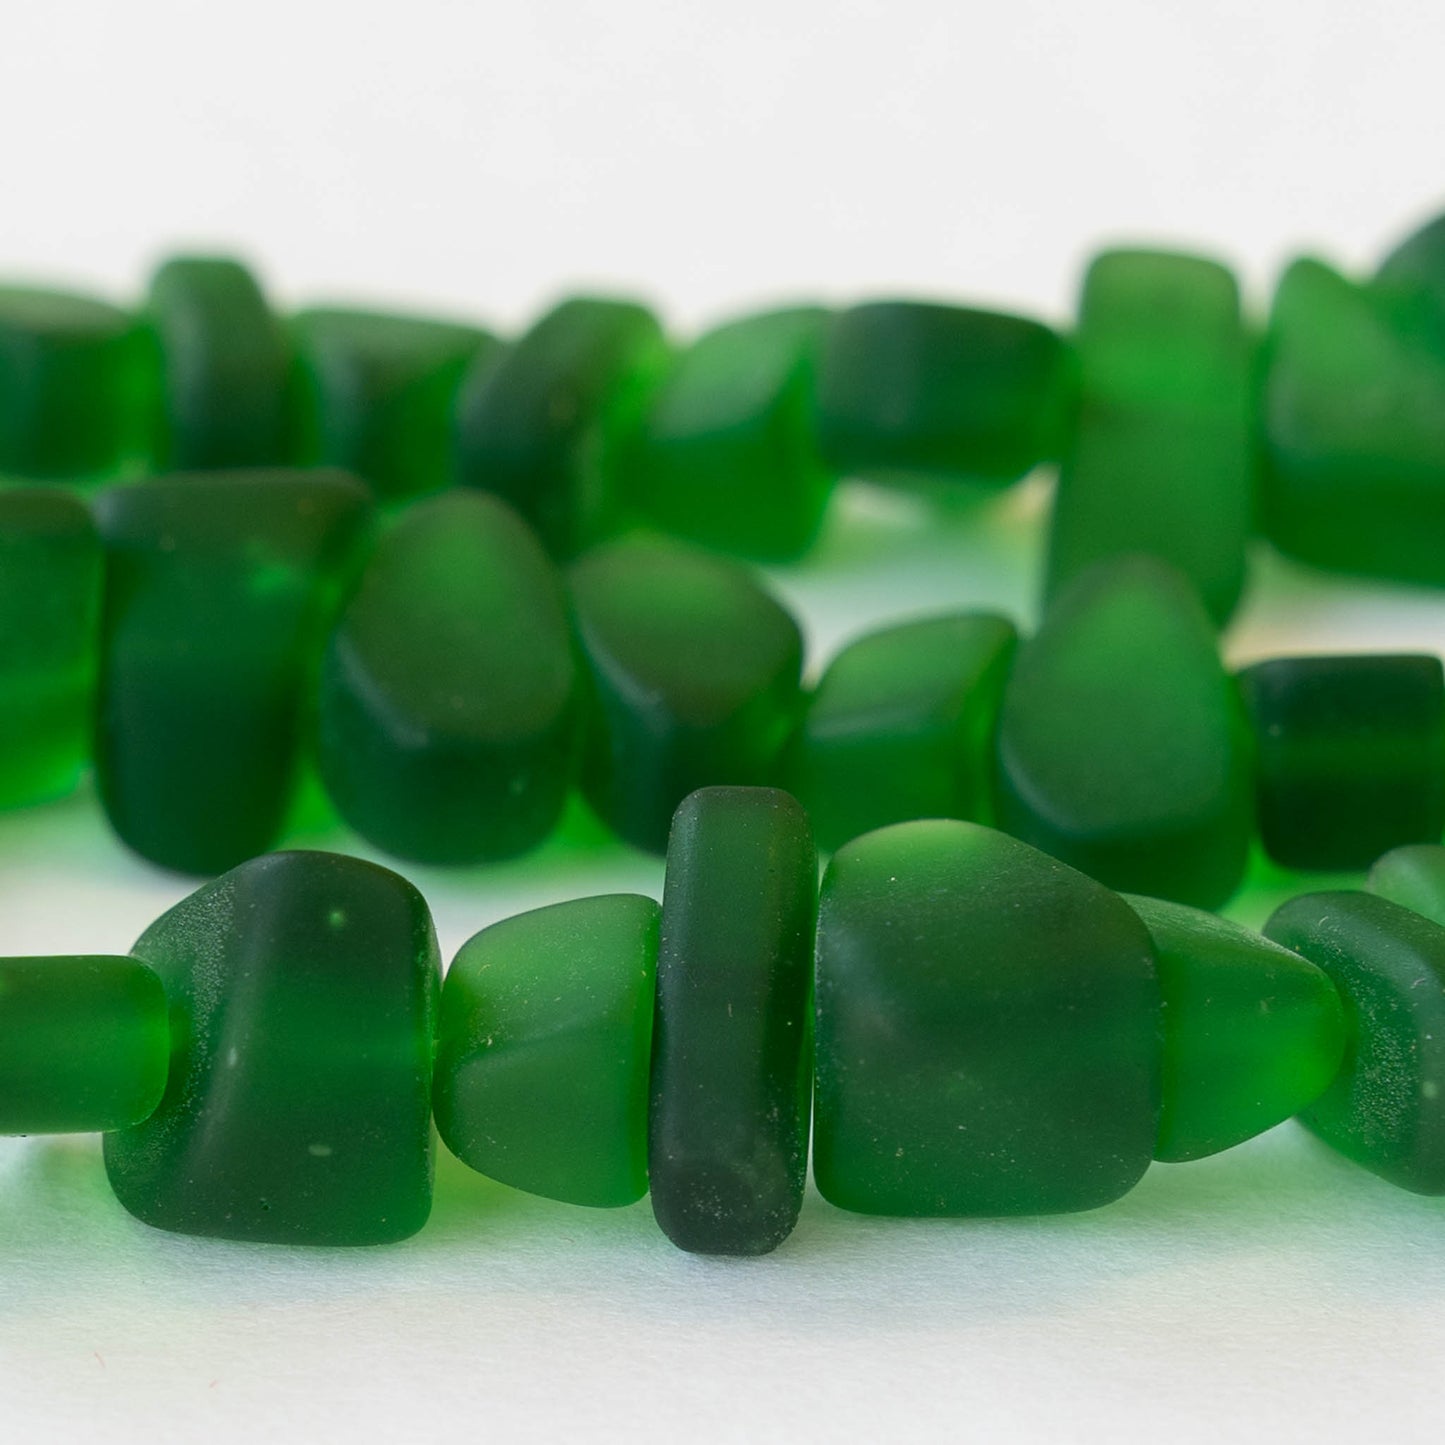 Frosted Glass Pebbles - Emerald - 30 Beads